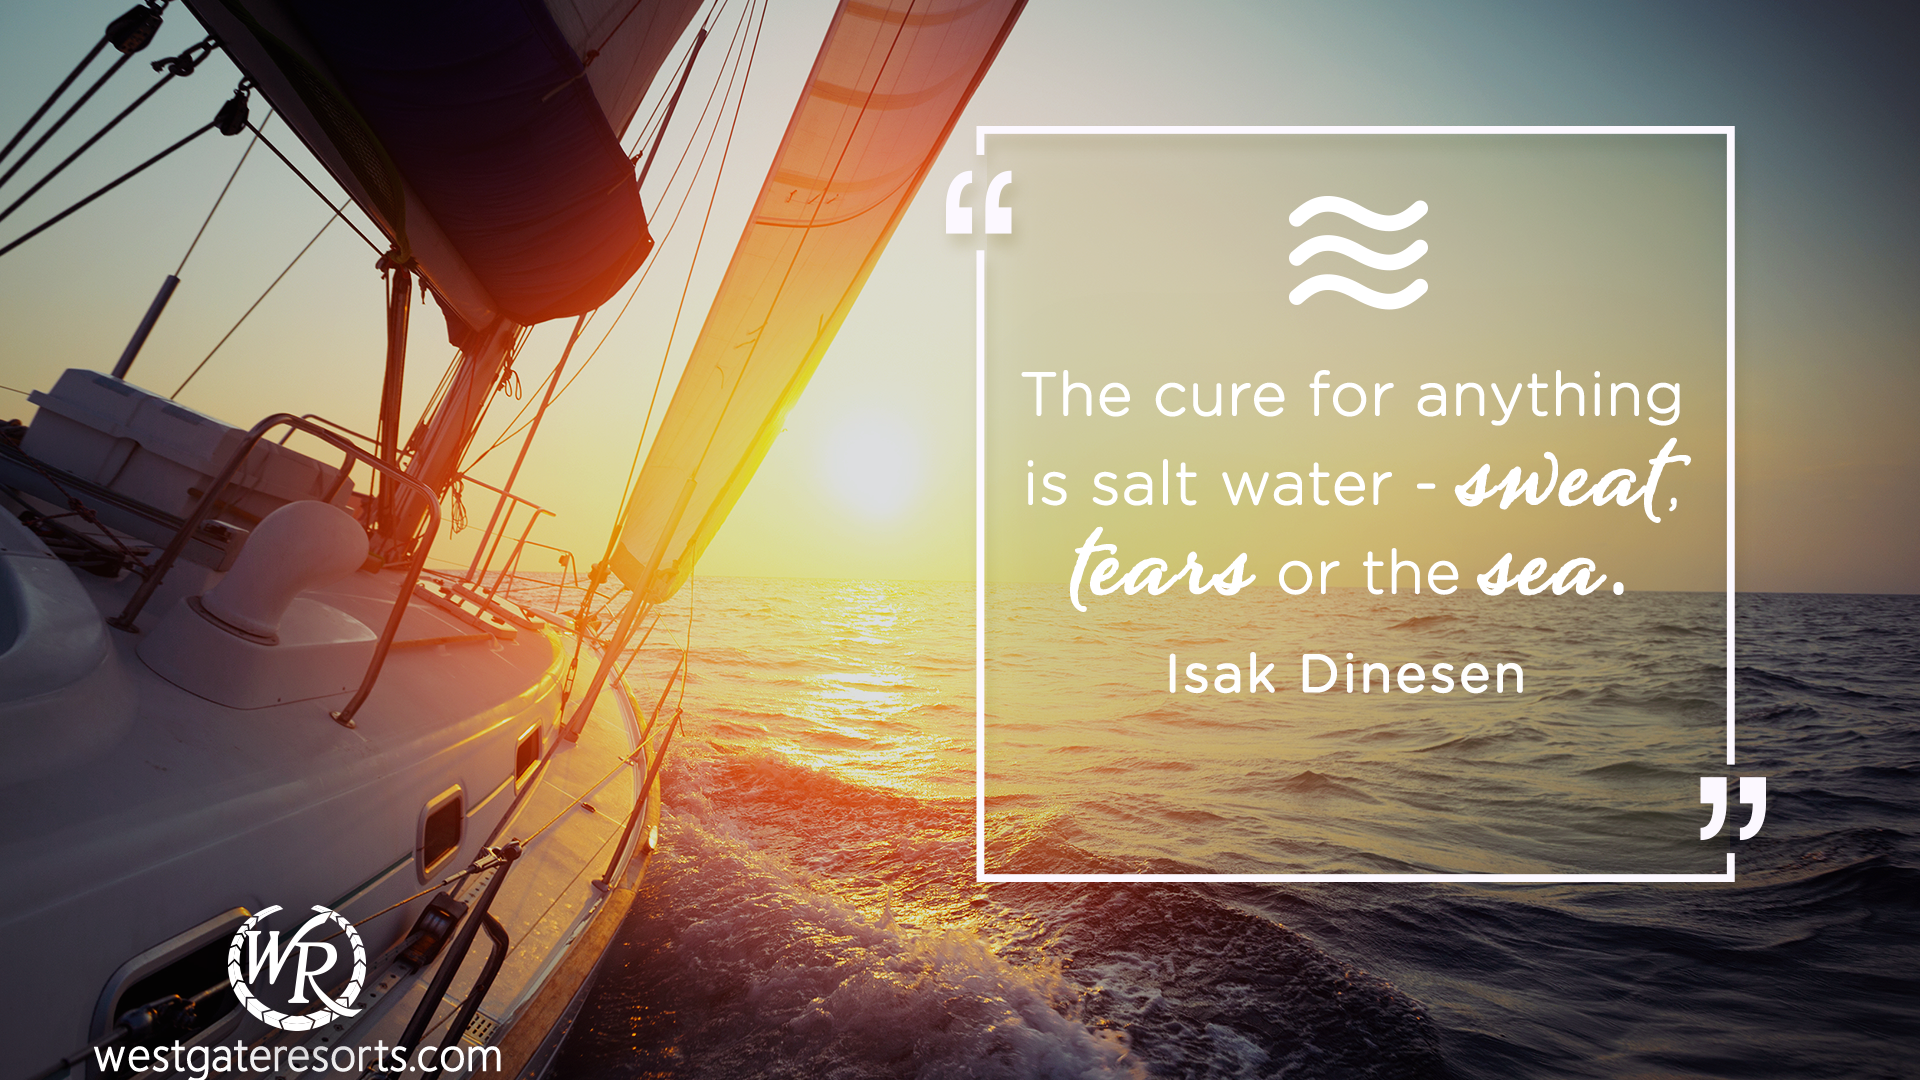 The cure for anything is salt water - sweat, tears or the sea.